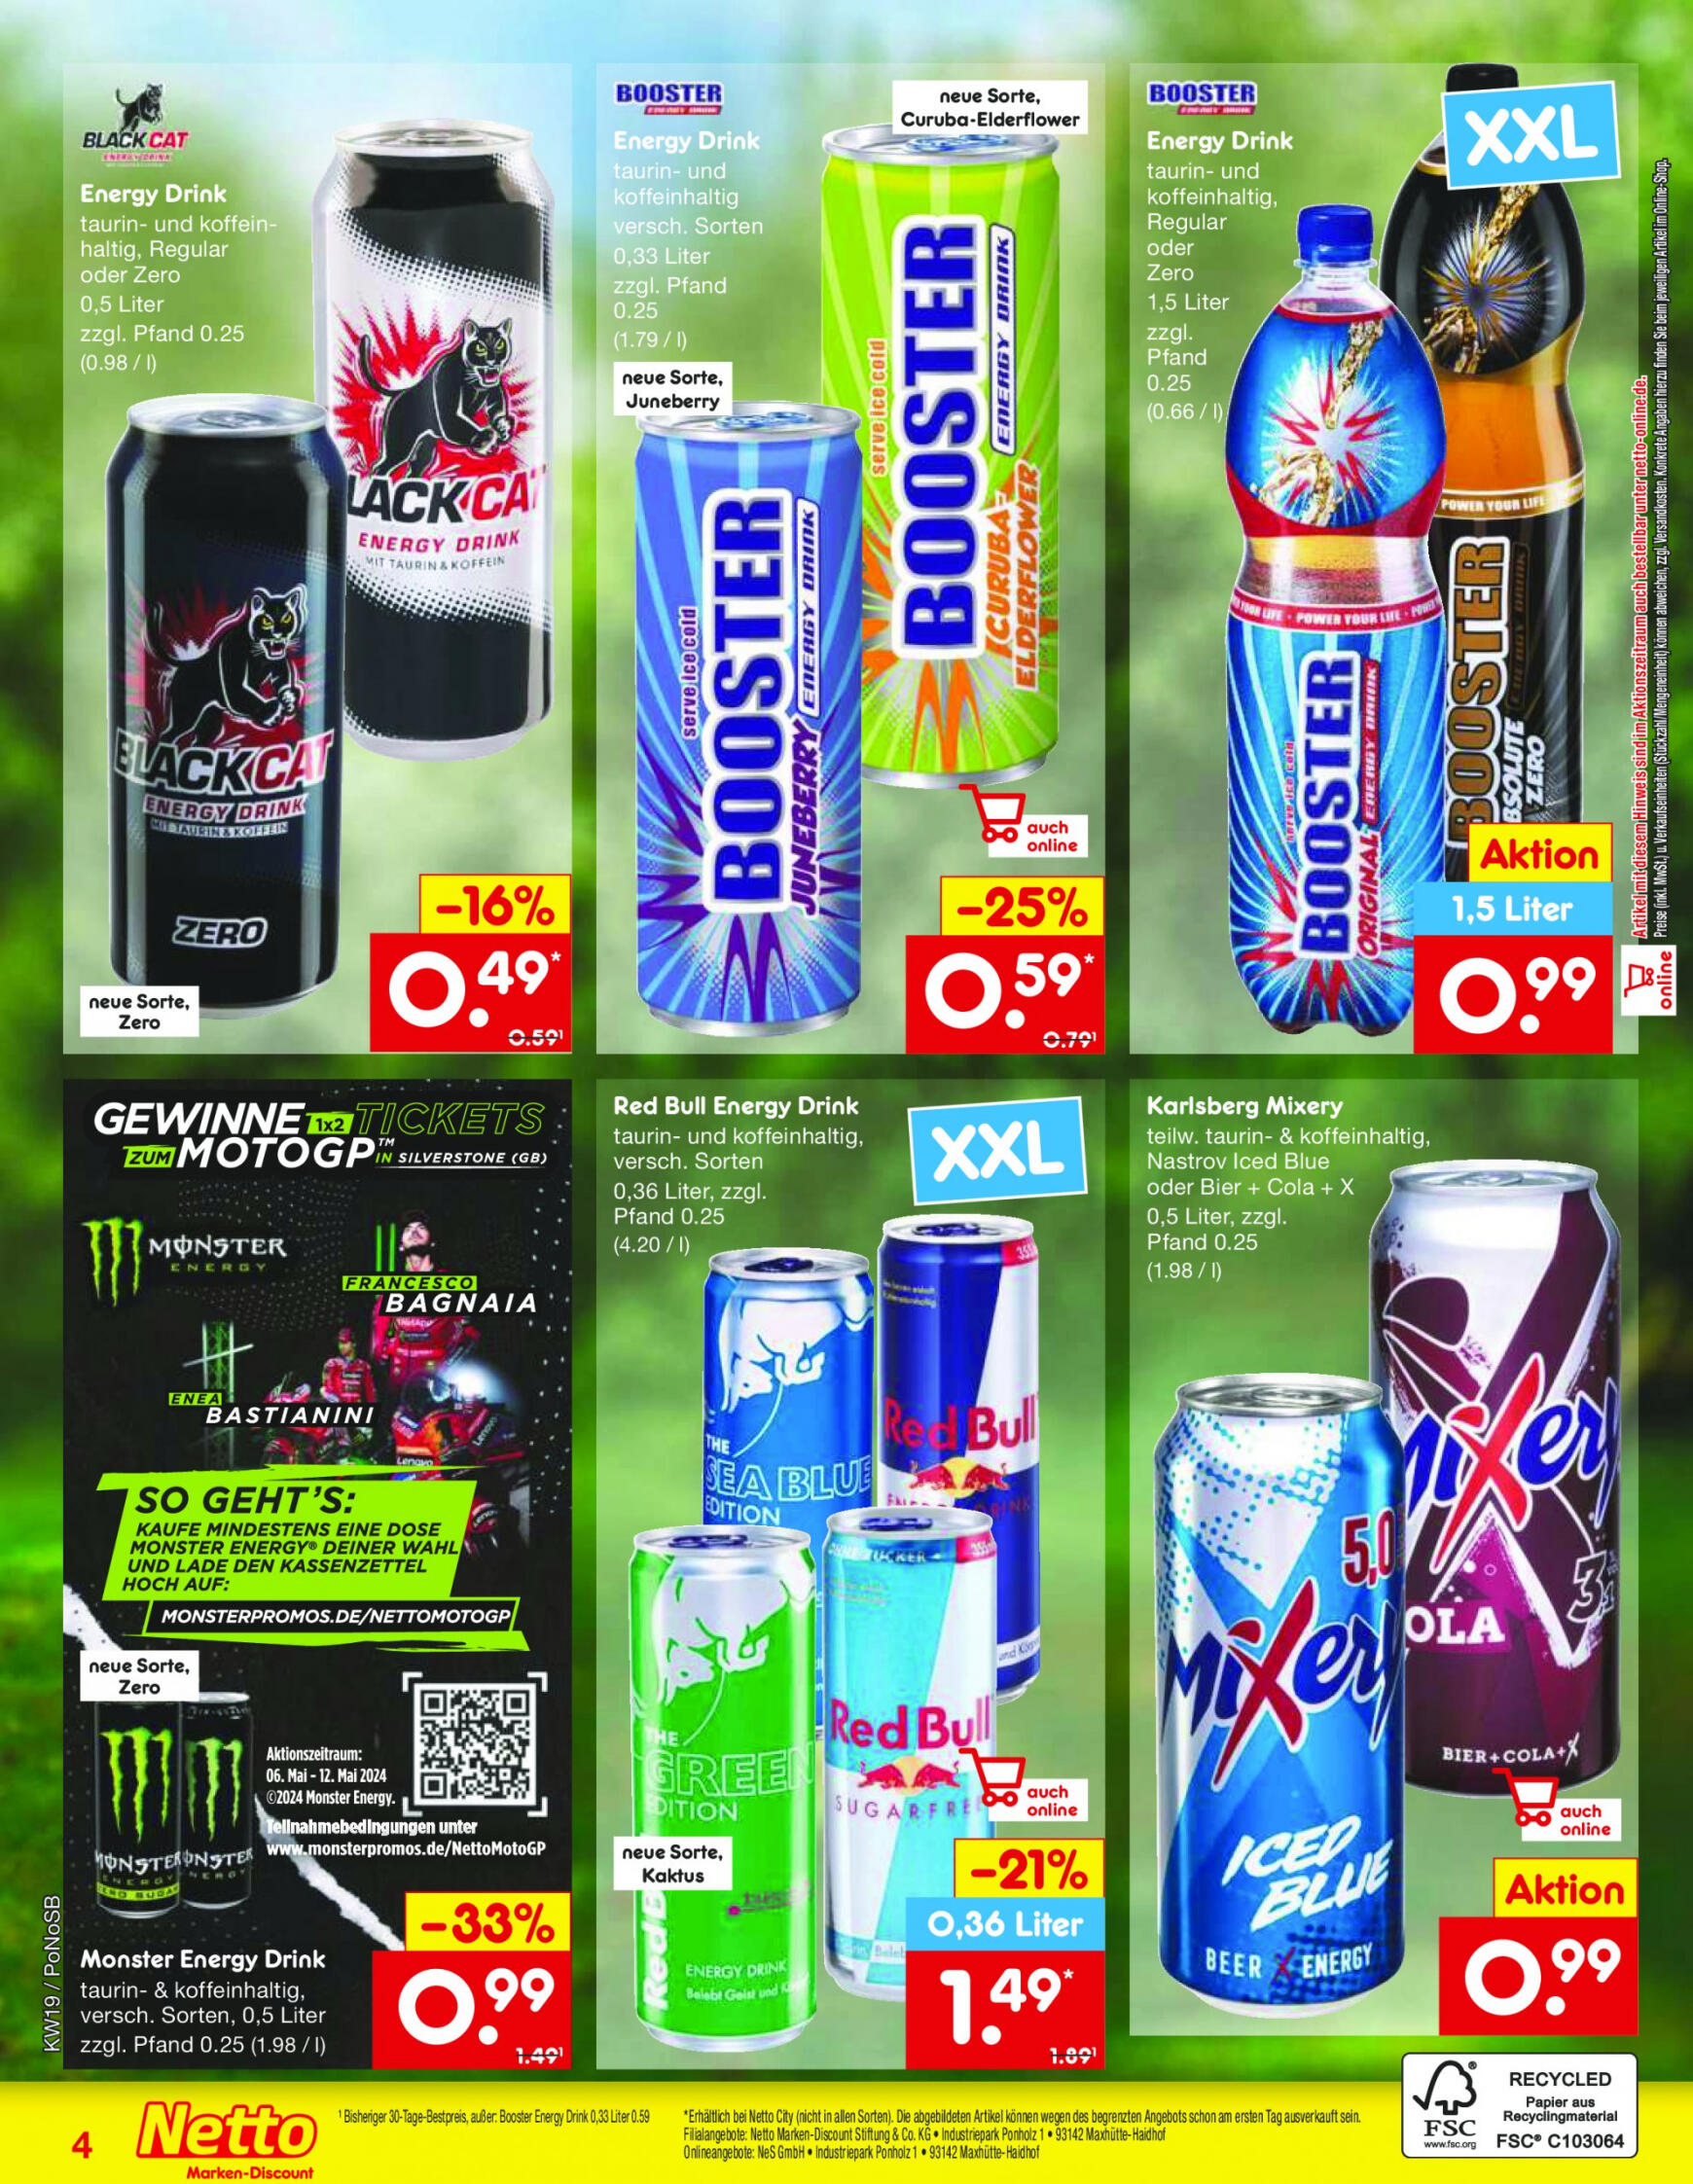 netto - Flyer Netto aktuell 06.05. - 11.05. - page: 19